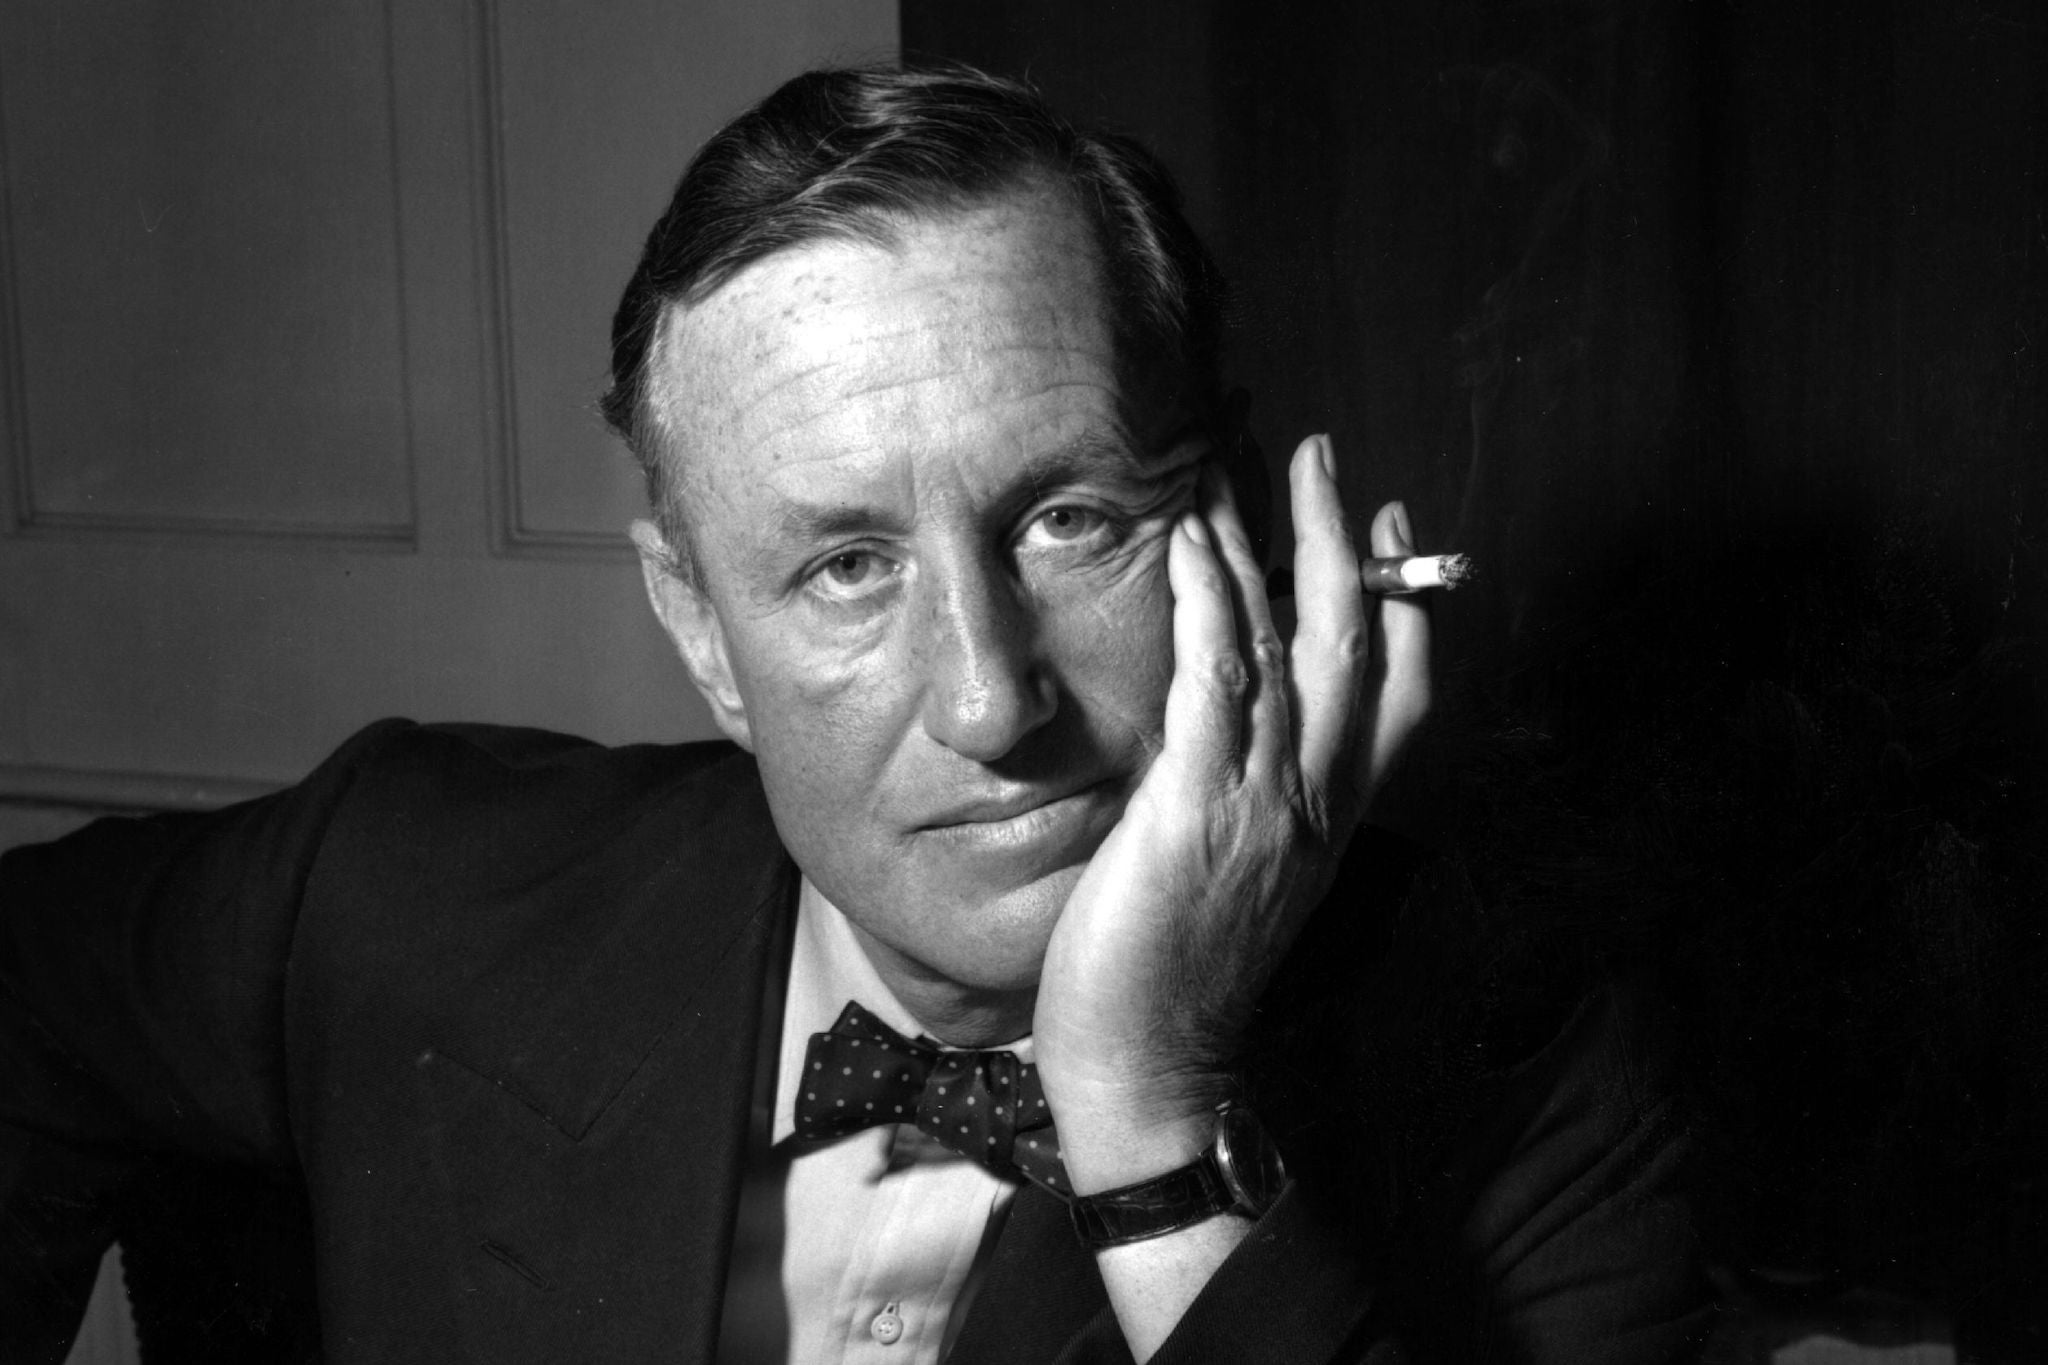 Respected novelist and former literary journalist Nicholas Shakespeare takes on Ian Fleming in his latest biography ‘Ian Fleming: The Complete Man’